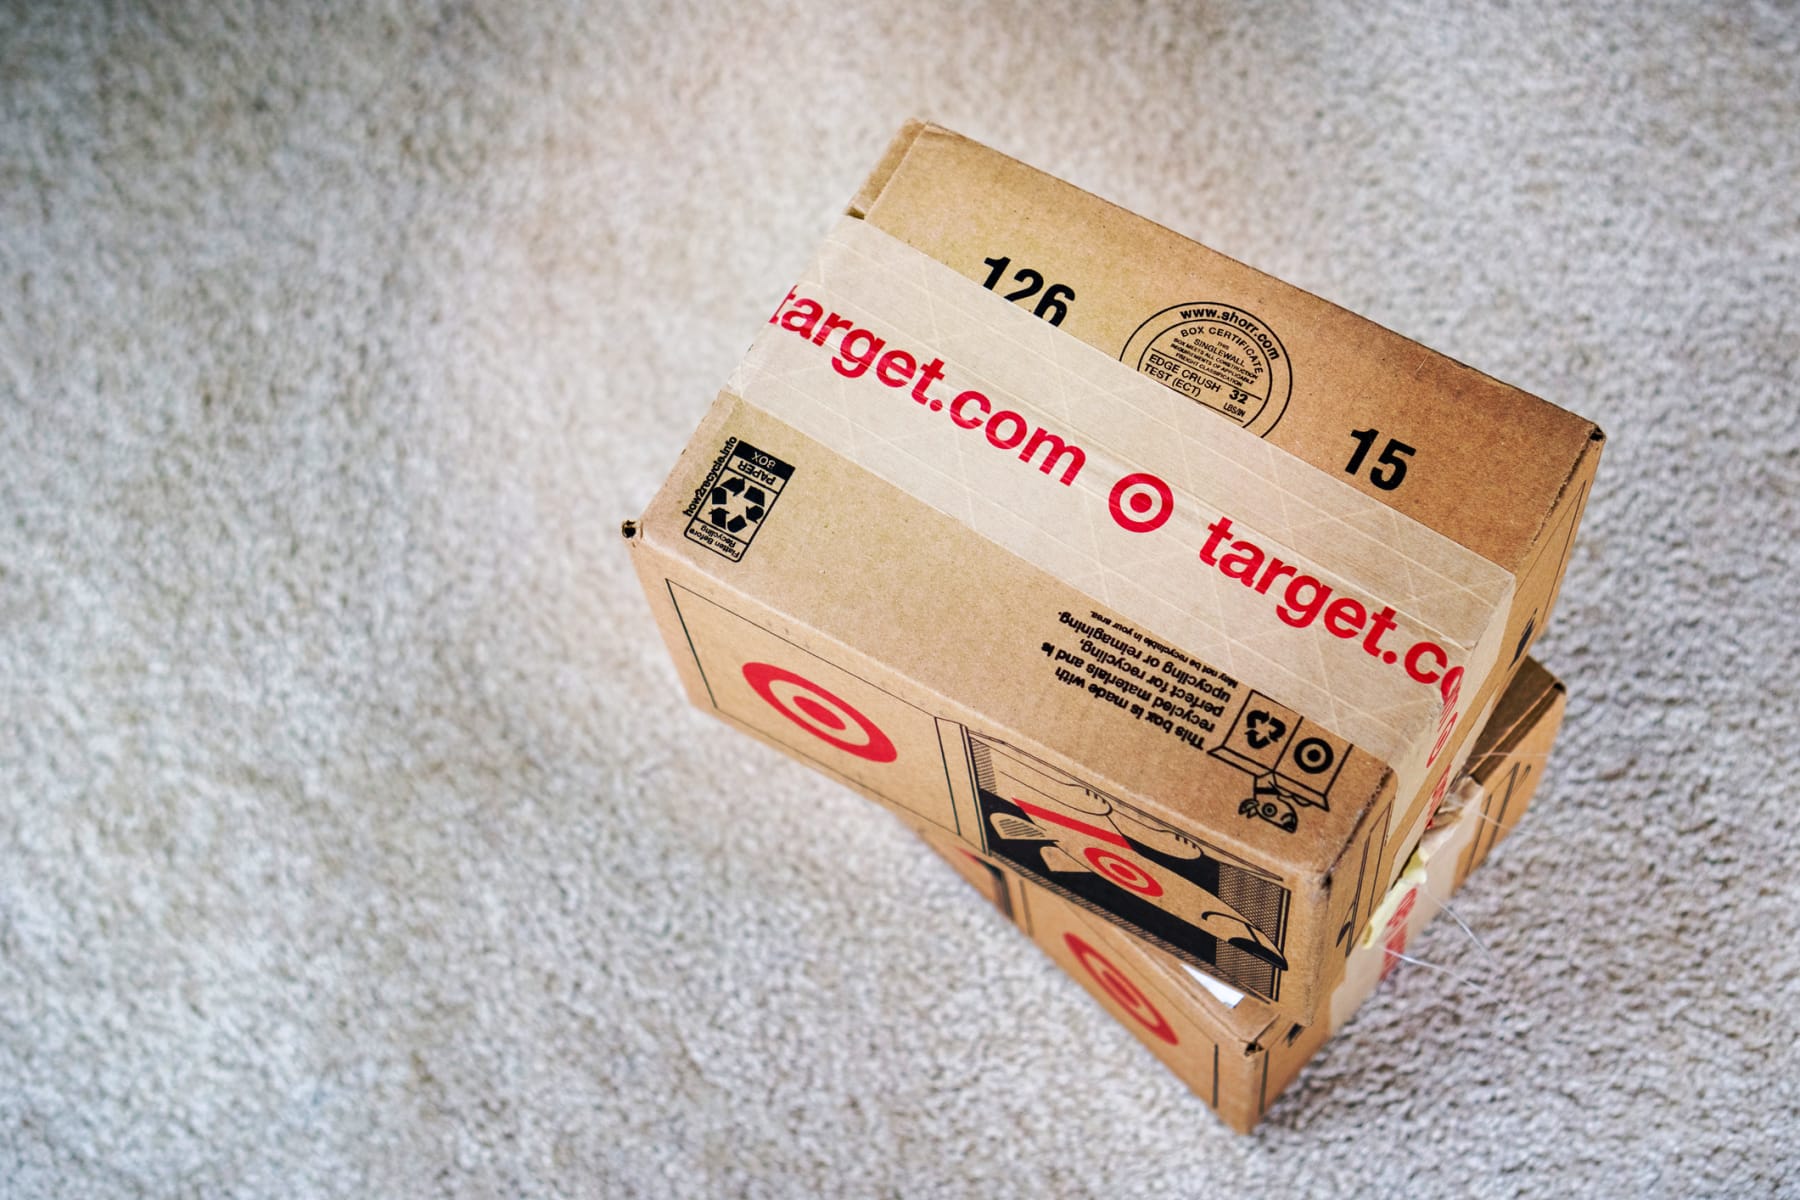 Target packages